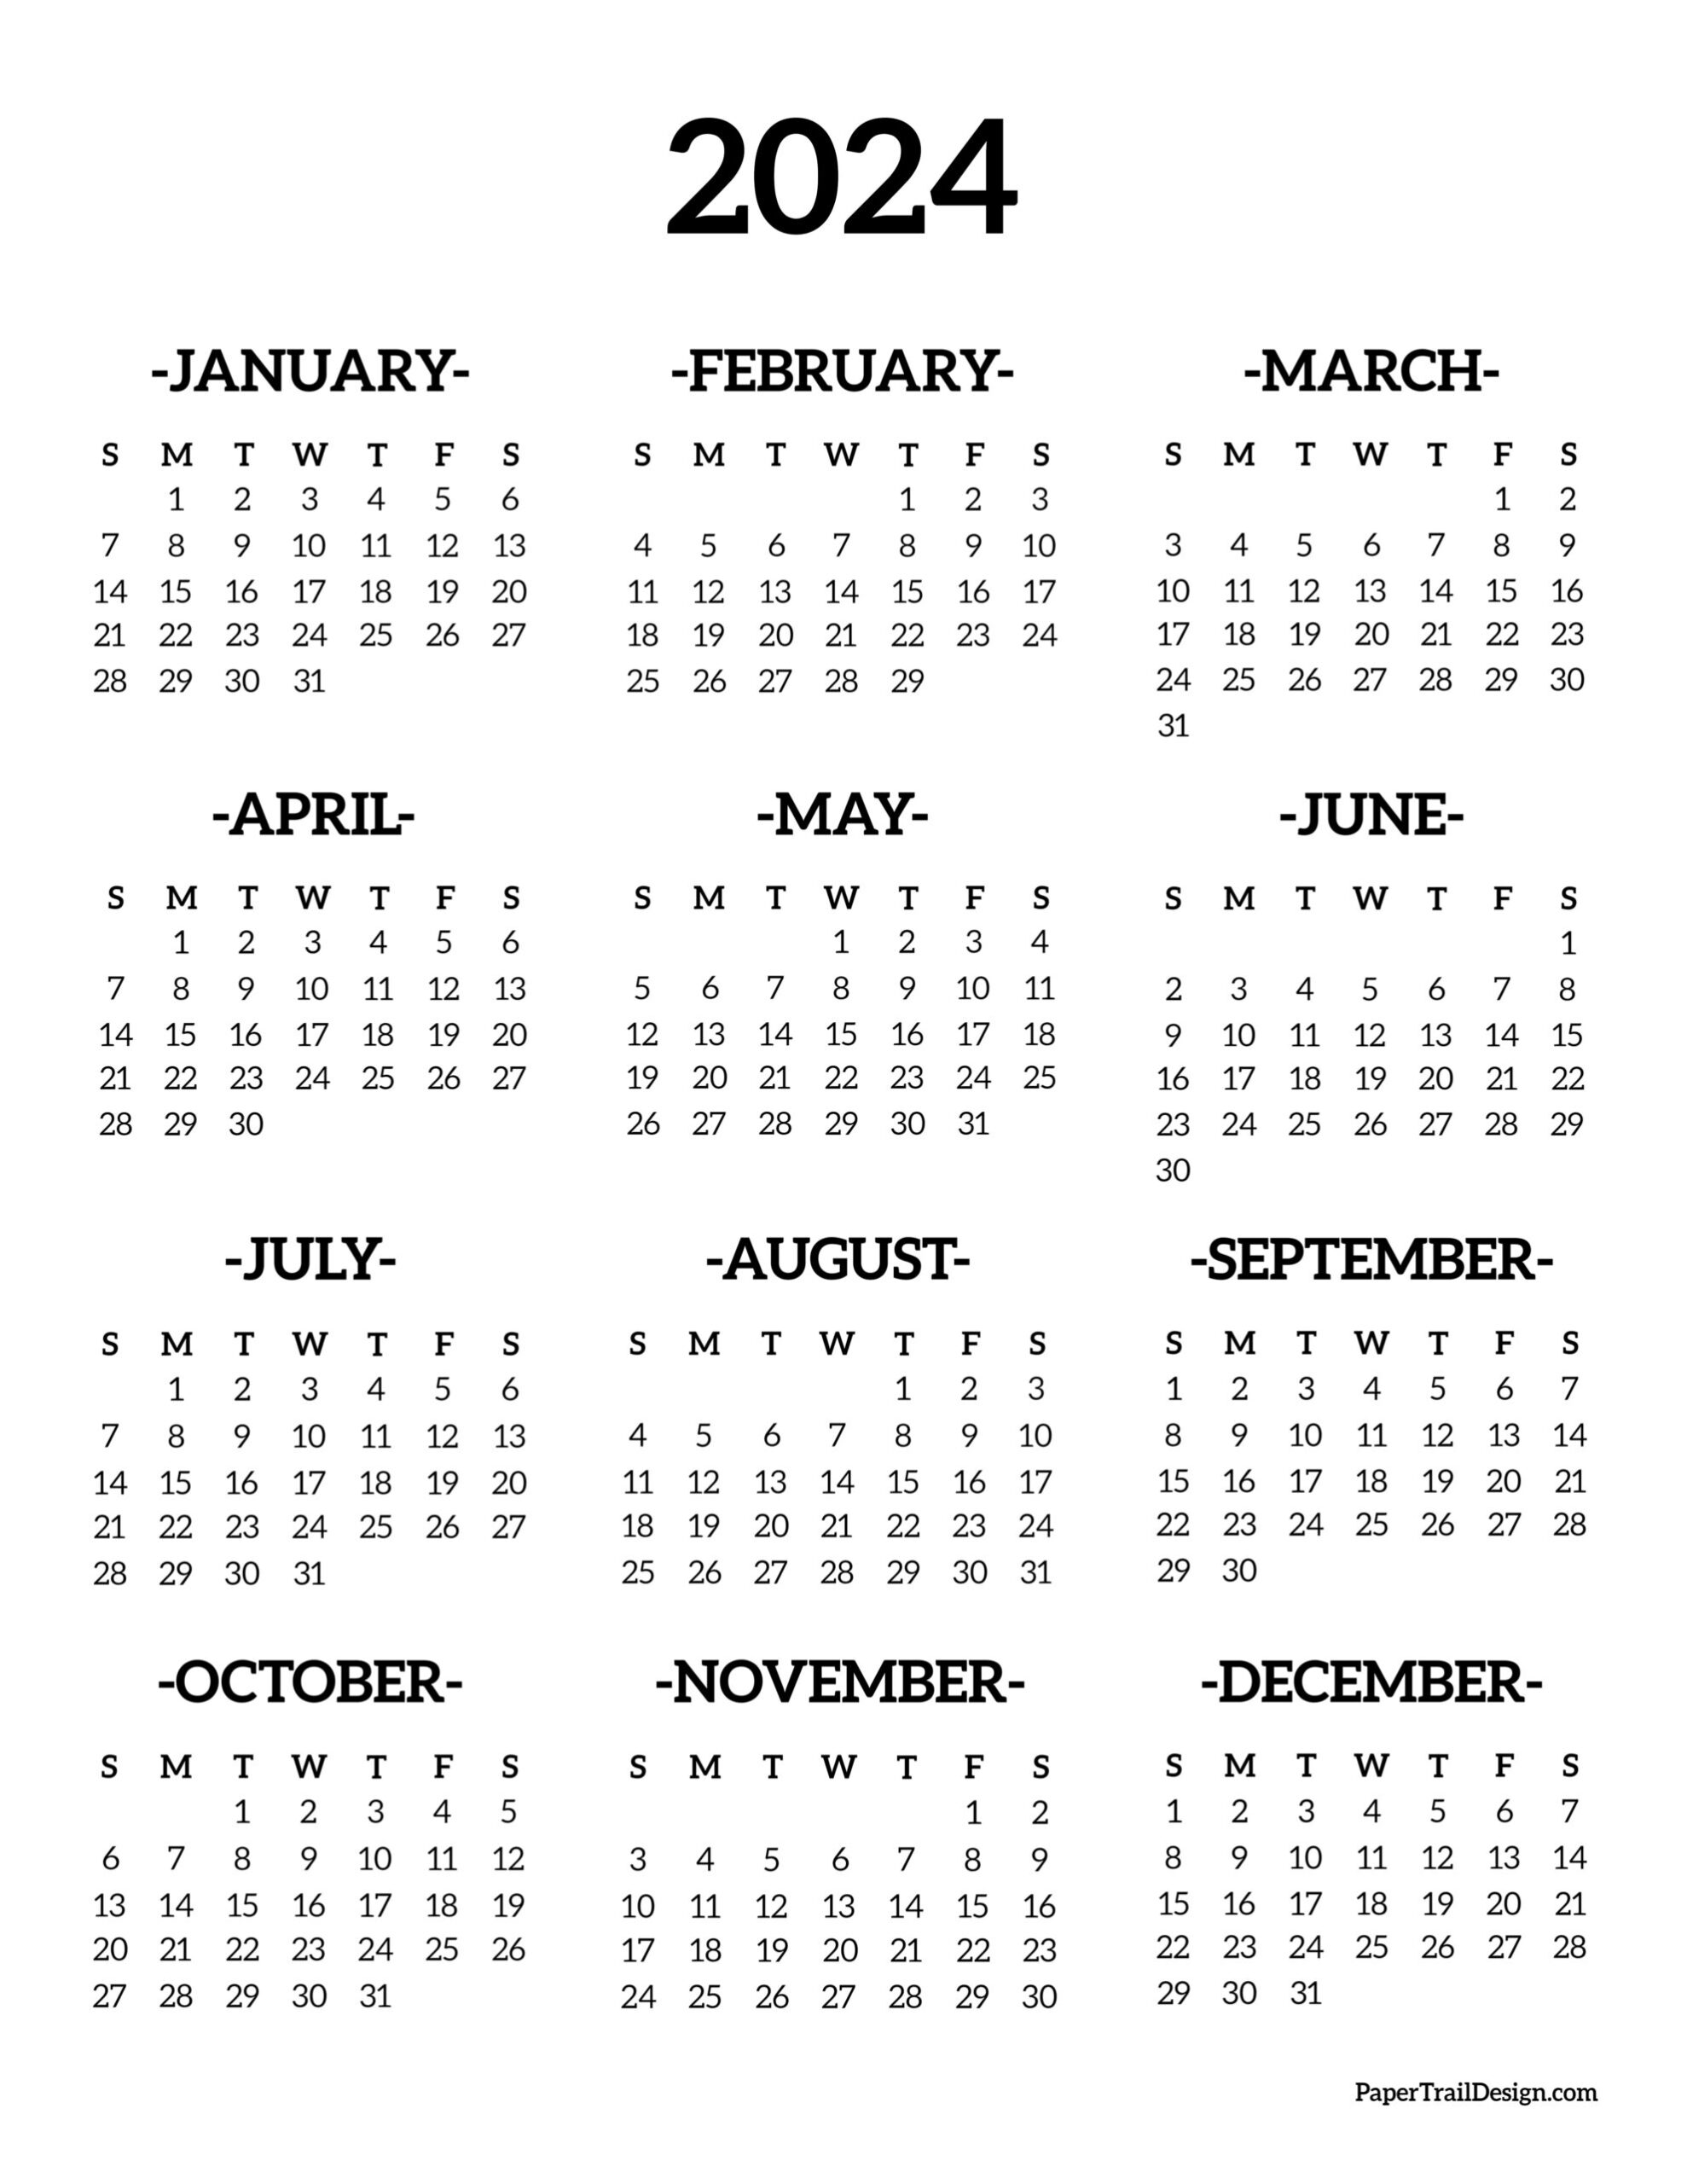 Calendar 2024 Printable One Page - Paper Trail Design for Free Printable Wall Calendar 2024